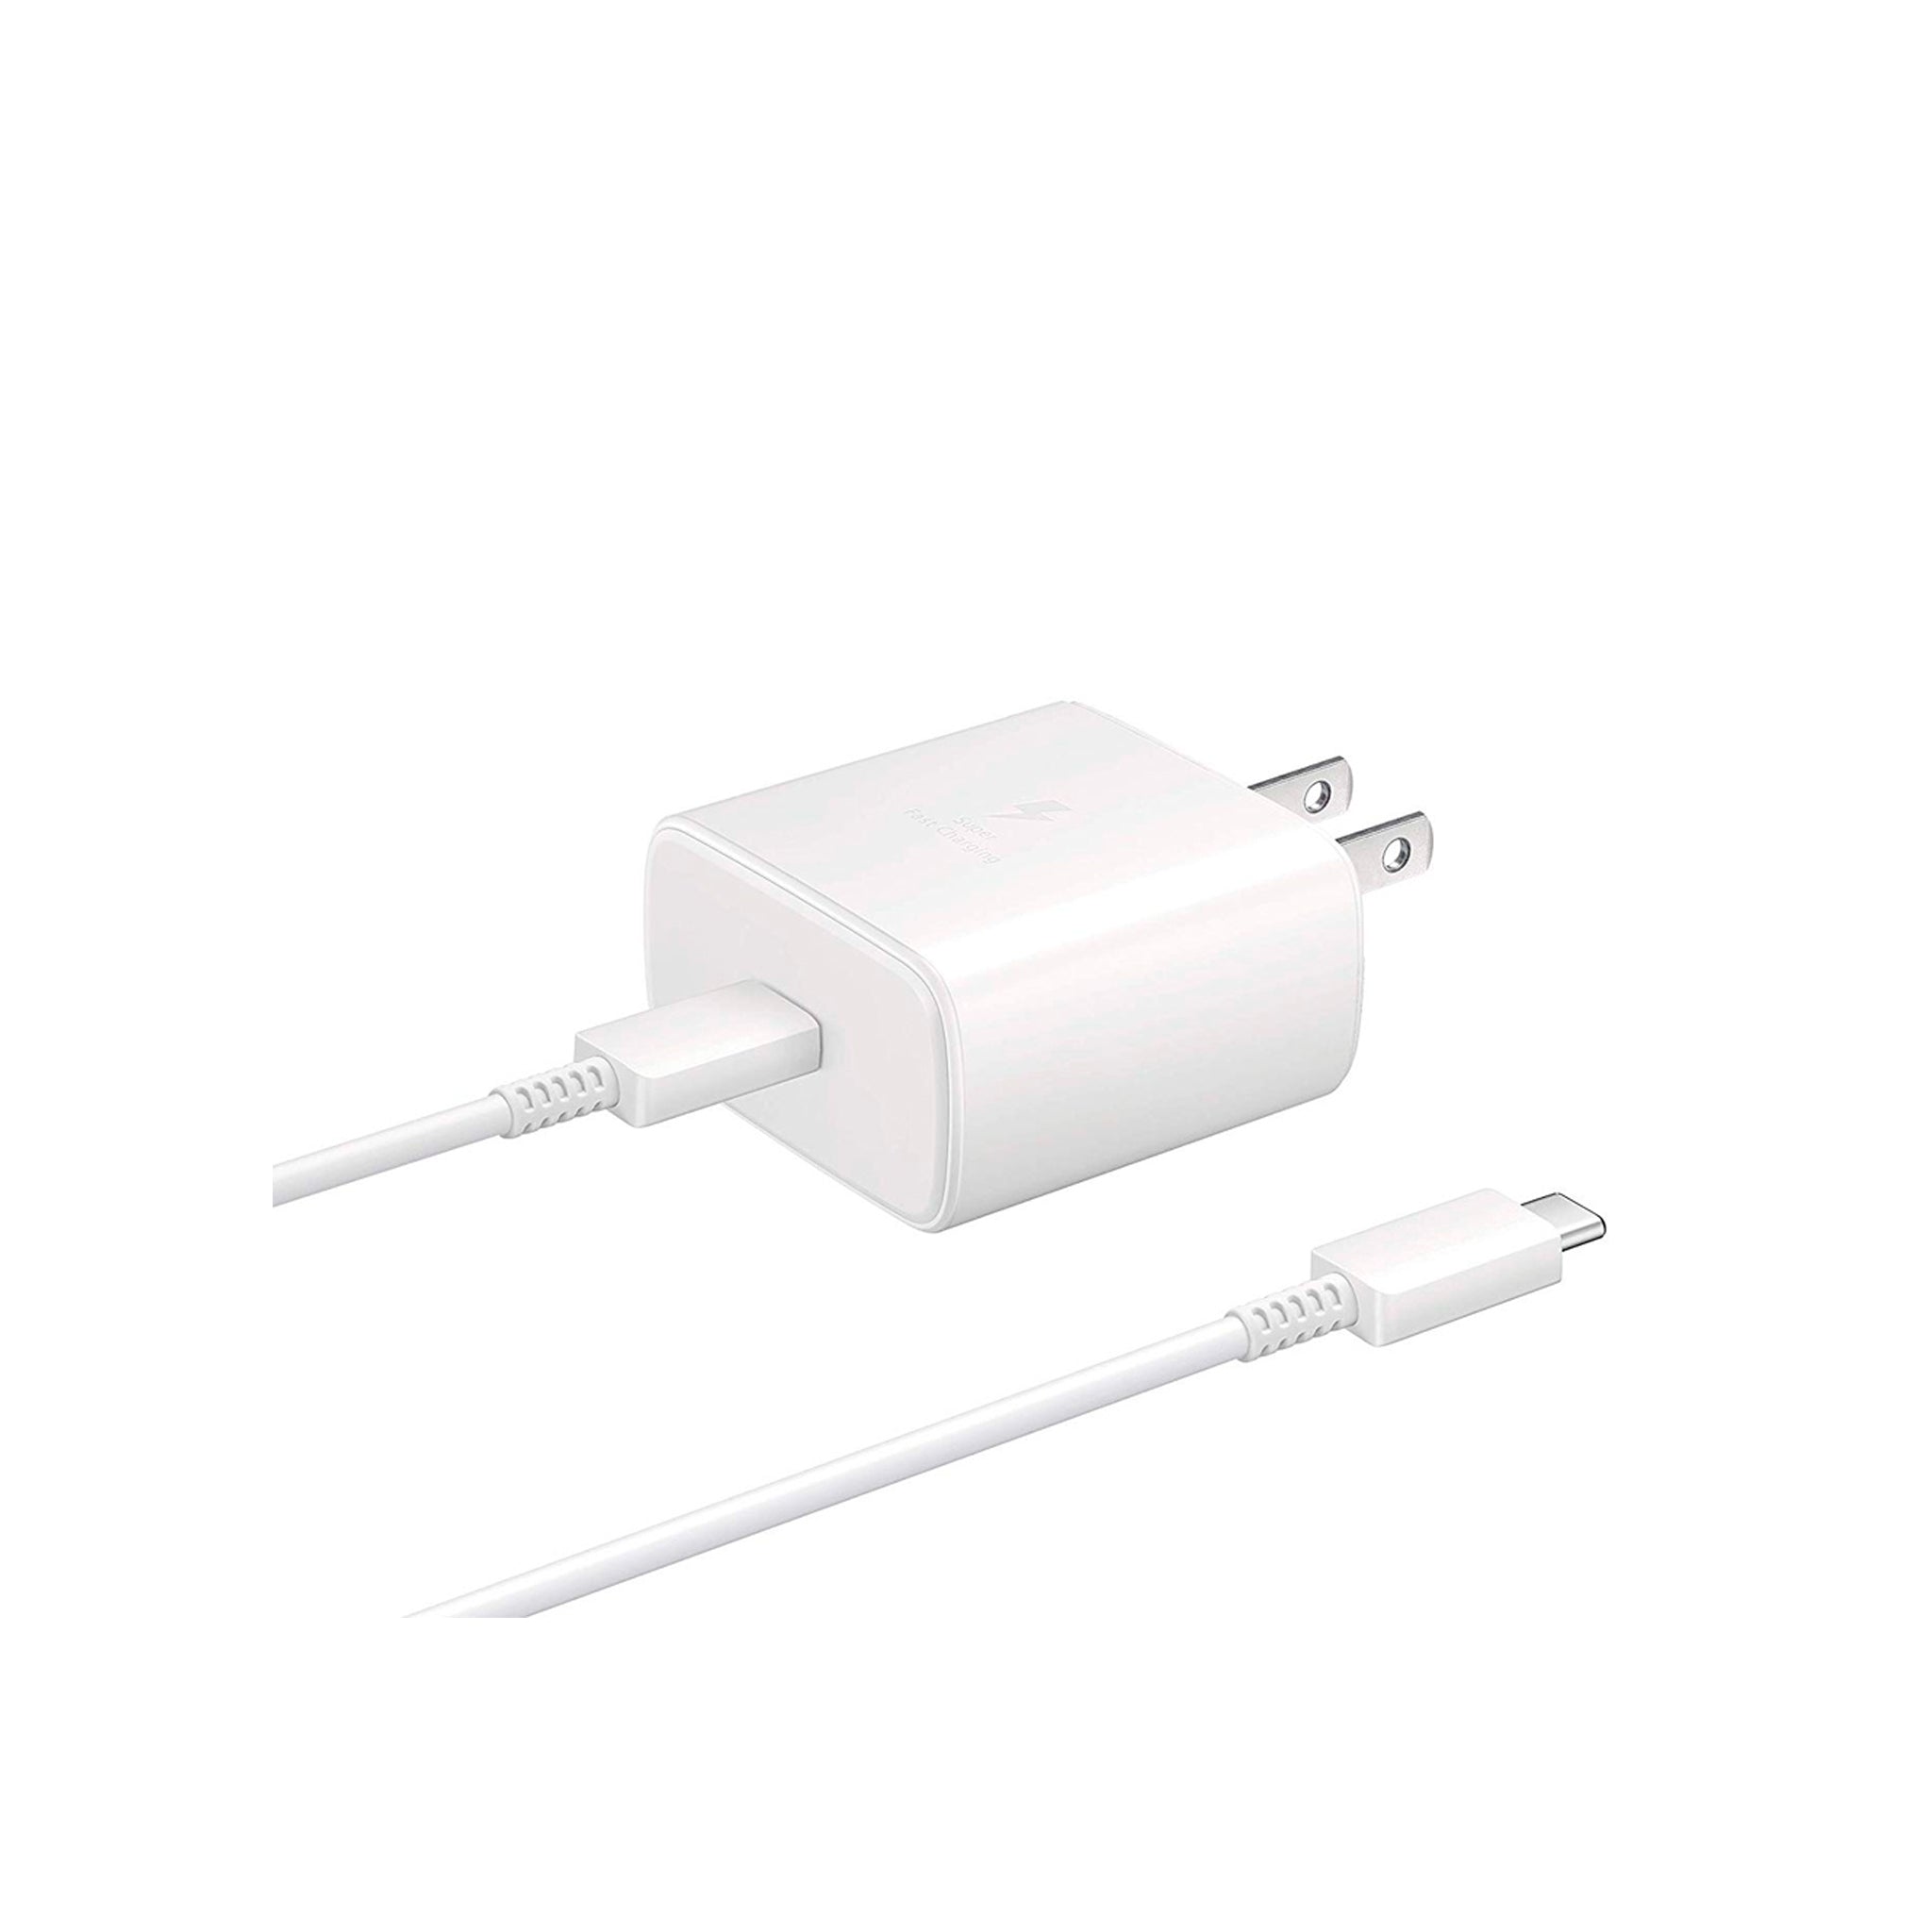 Samsung - Travel Charger with 45 Watt Super Fast Charge, 3amp , Type C to Type C Cable Included - White